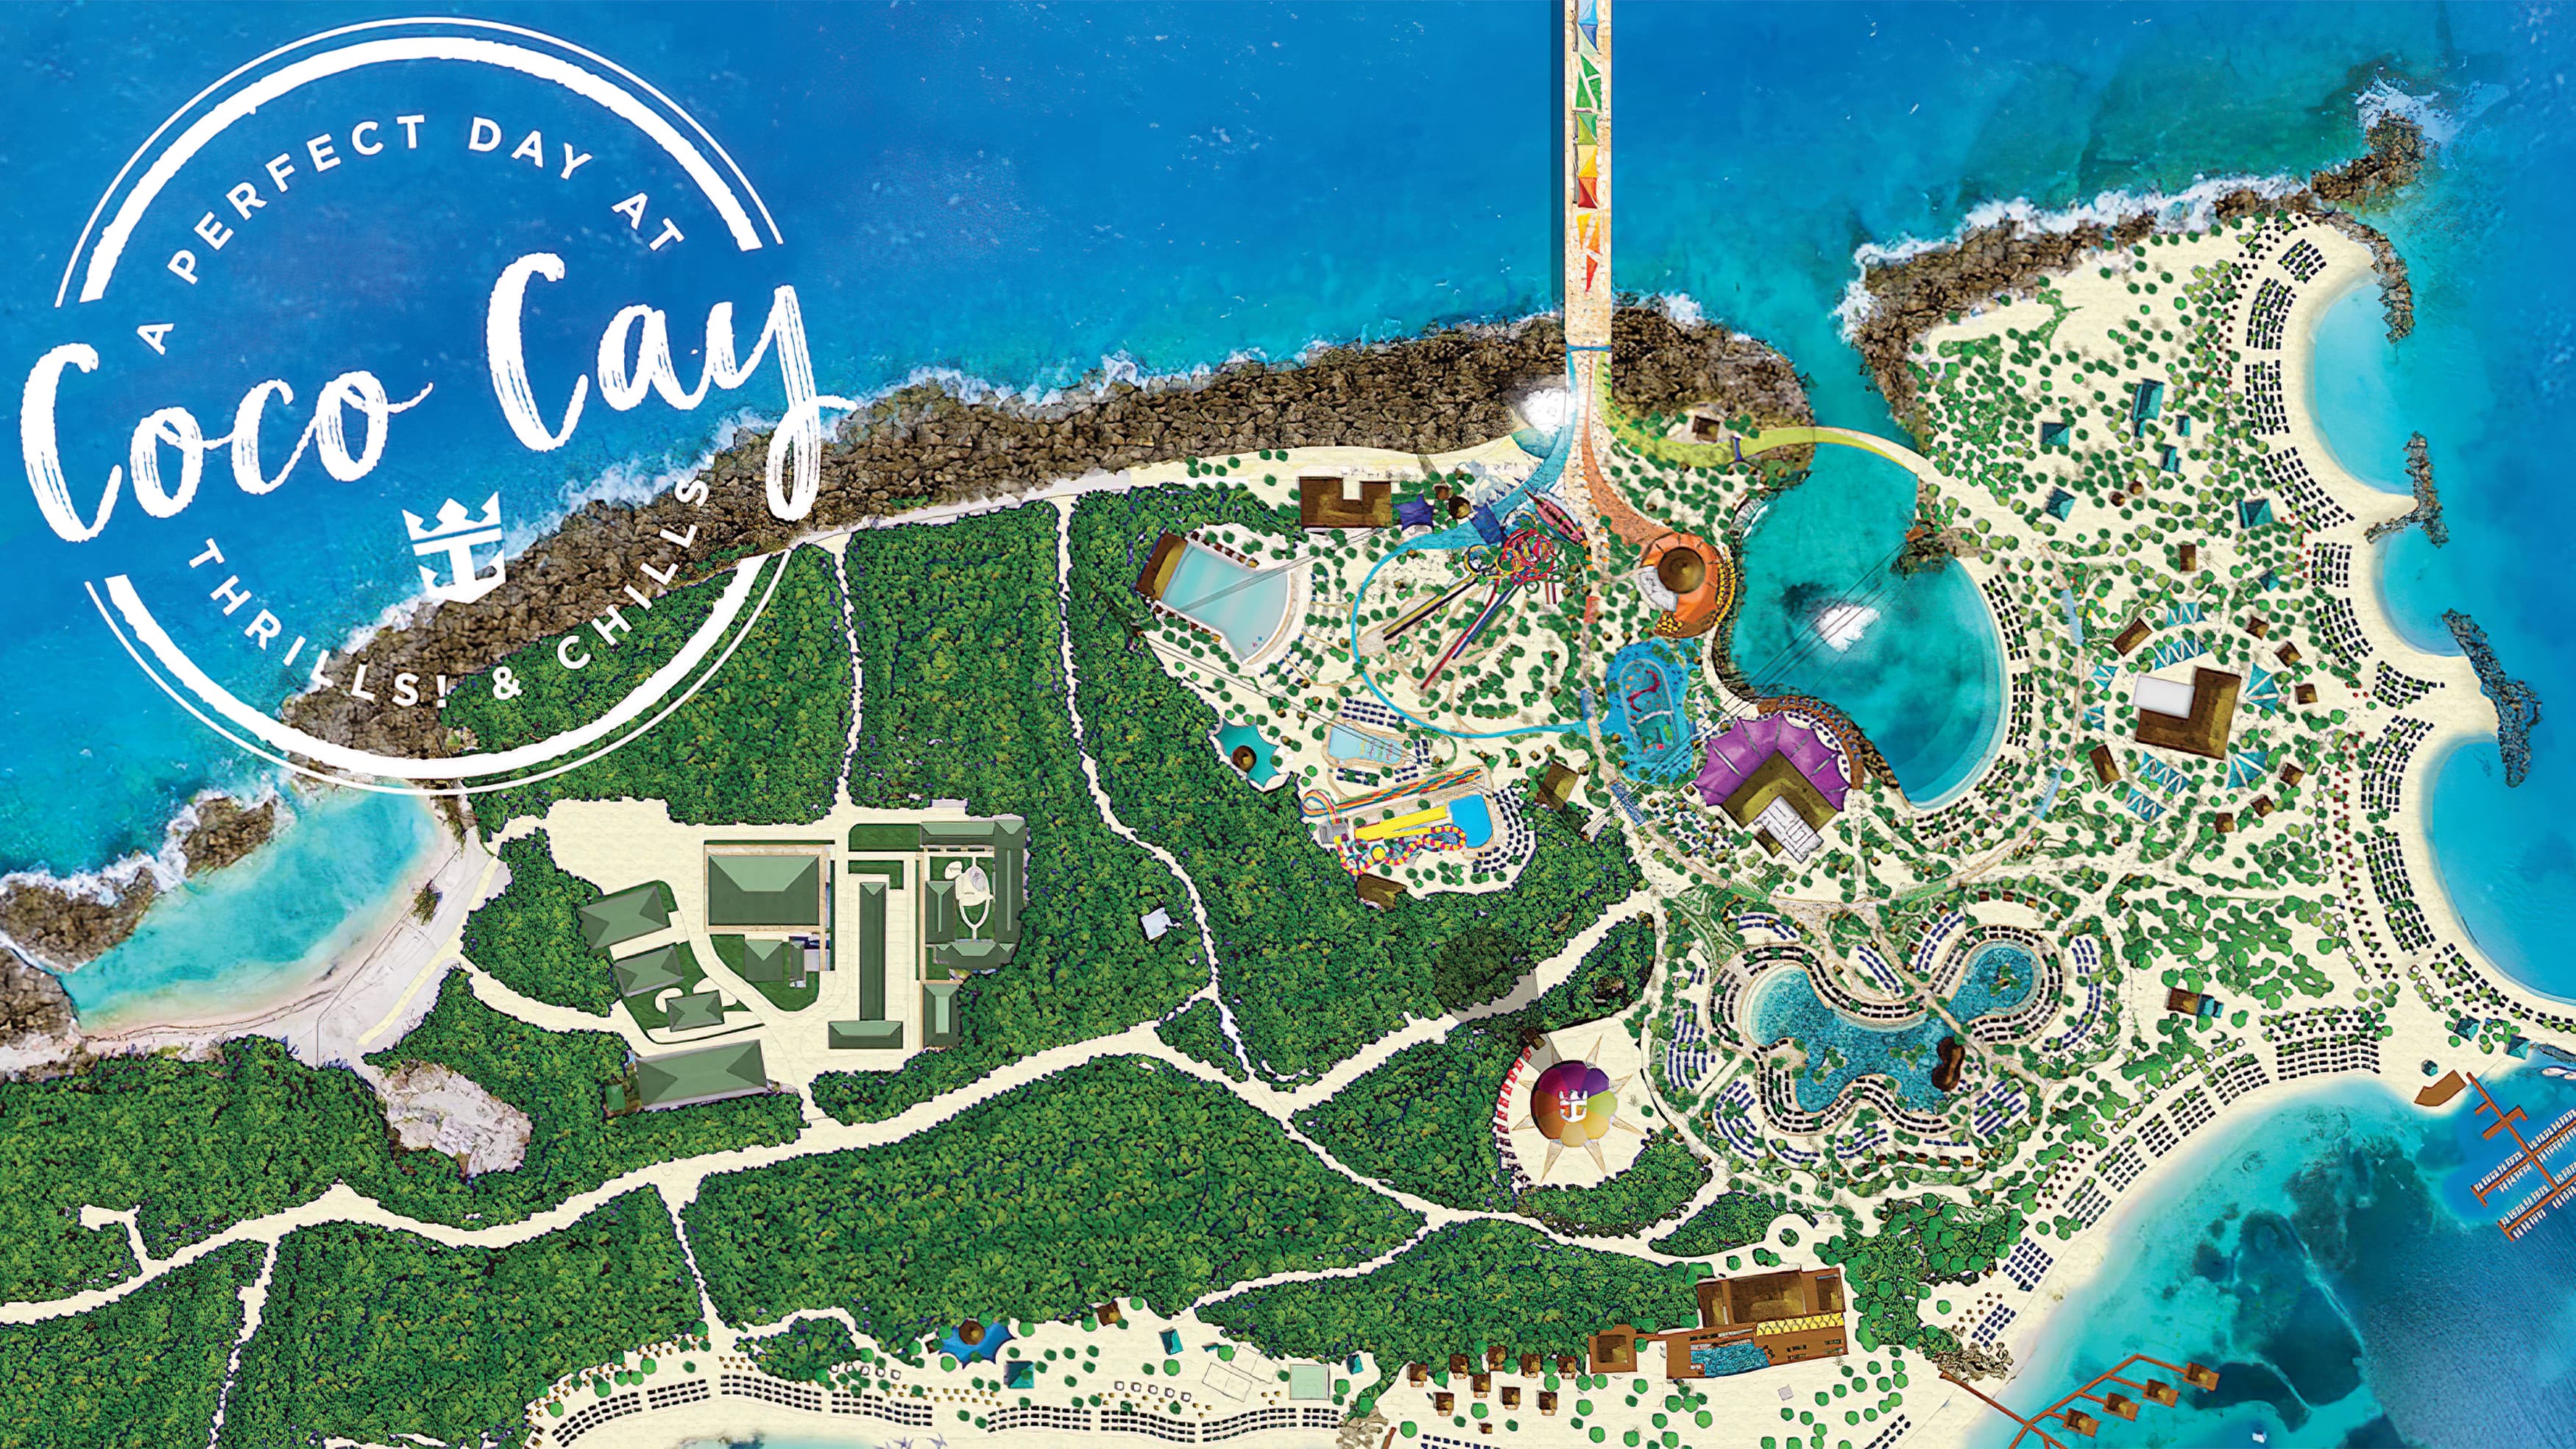 A playful, illustrative map of Coco Cay Island located in the Bahamas